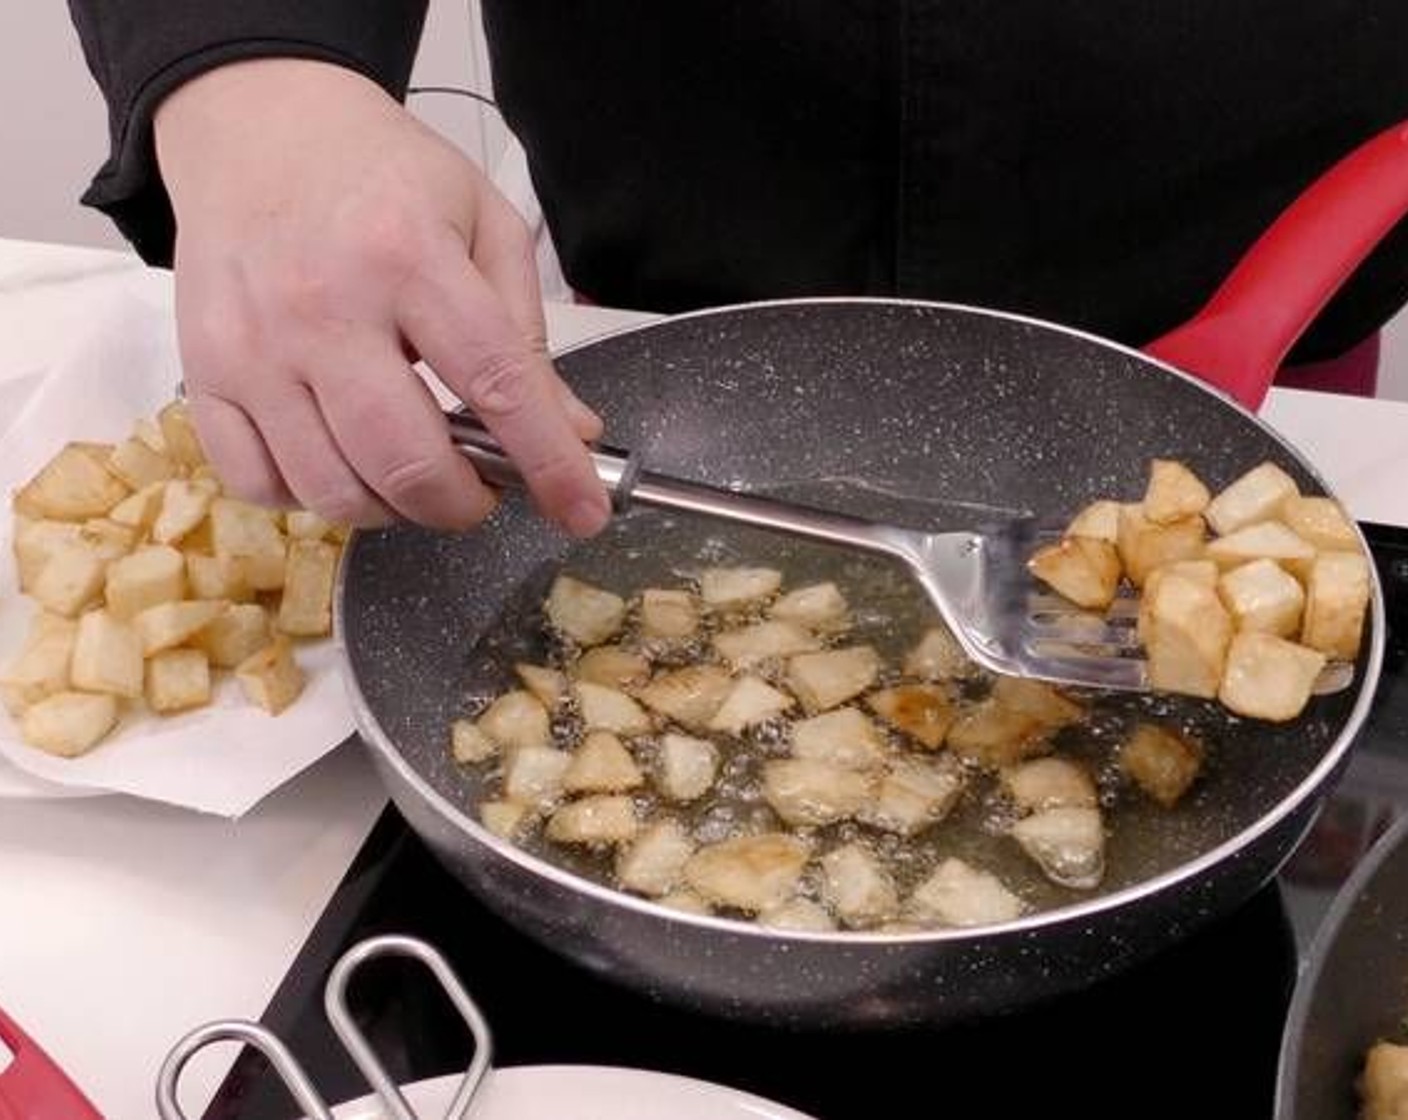 step 7 Once fried to a golden brown color, remove and place on a plate with paper towels to dry the excess oil.